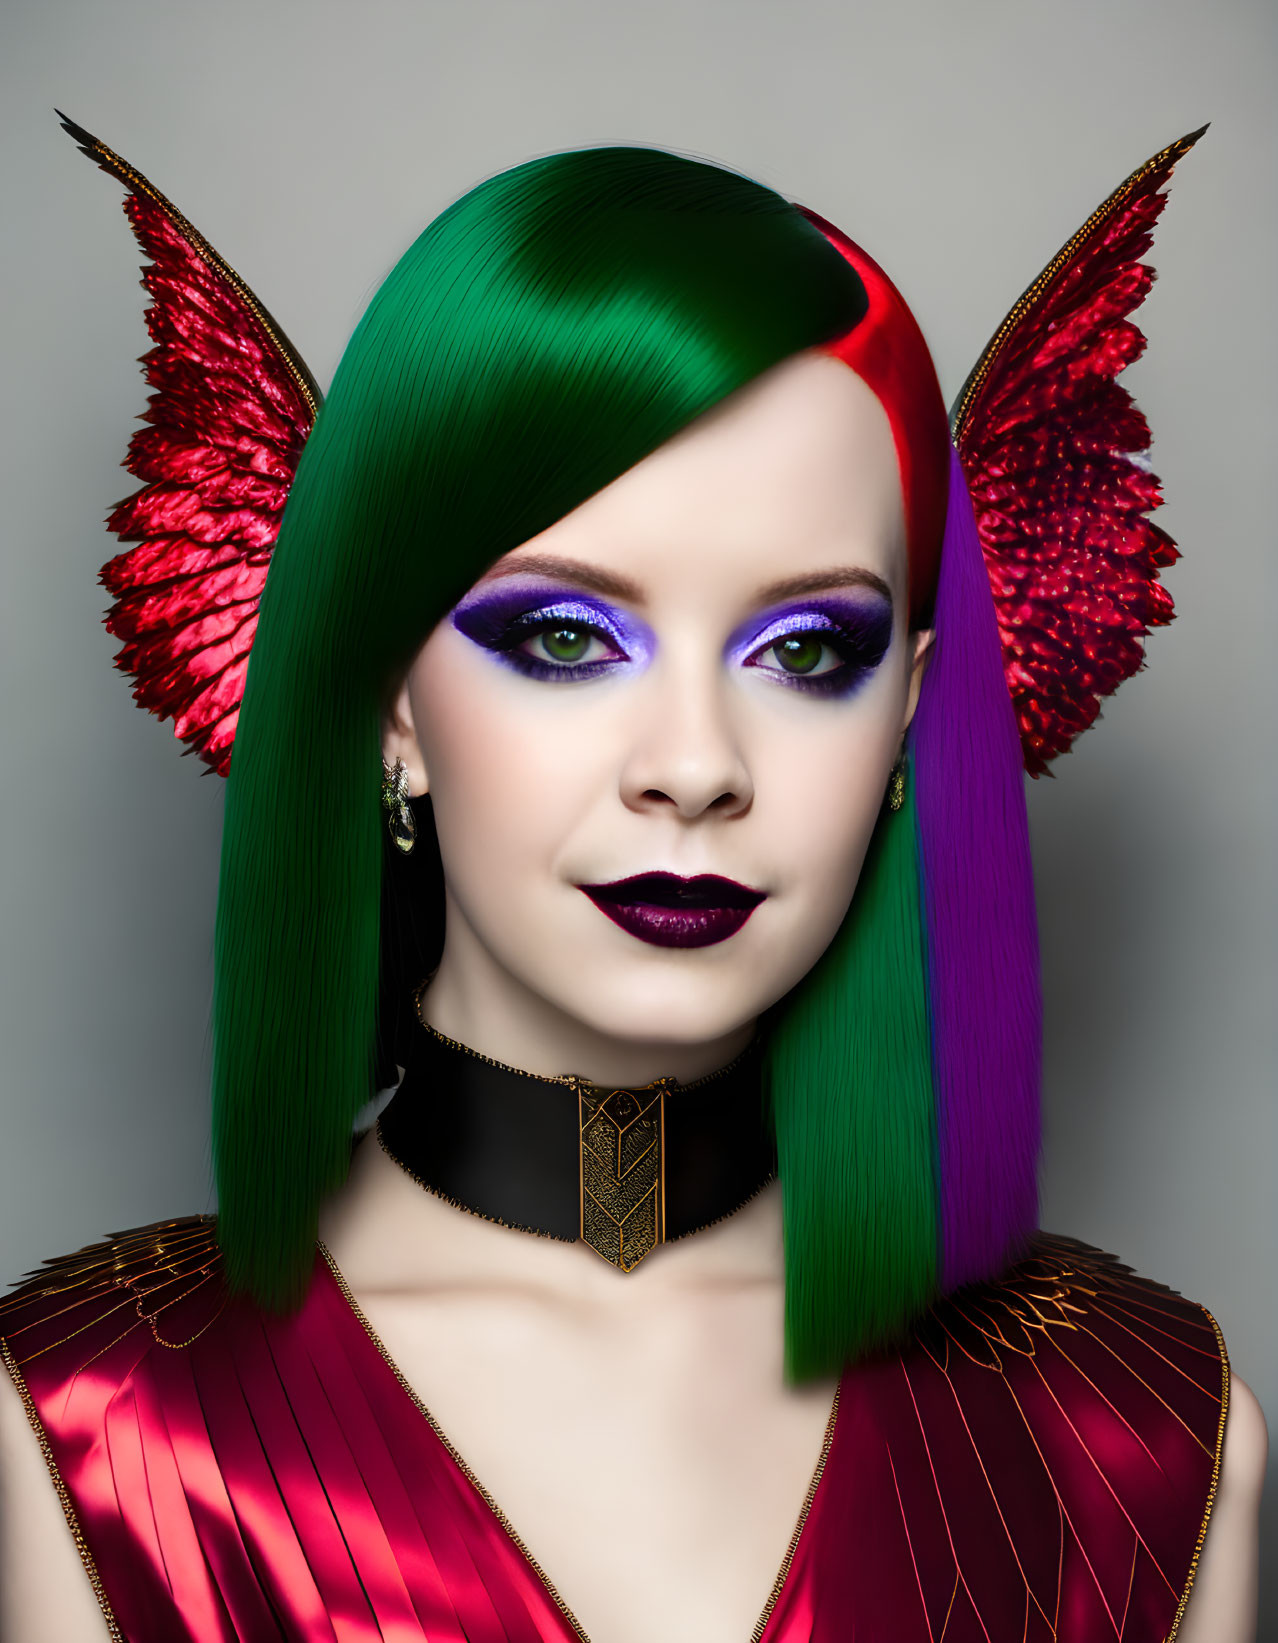 Portrait of Woman with Green and Purple Hair, Red Wings, Violet Eyes, Dark Lipstick